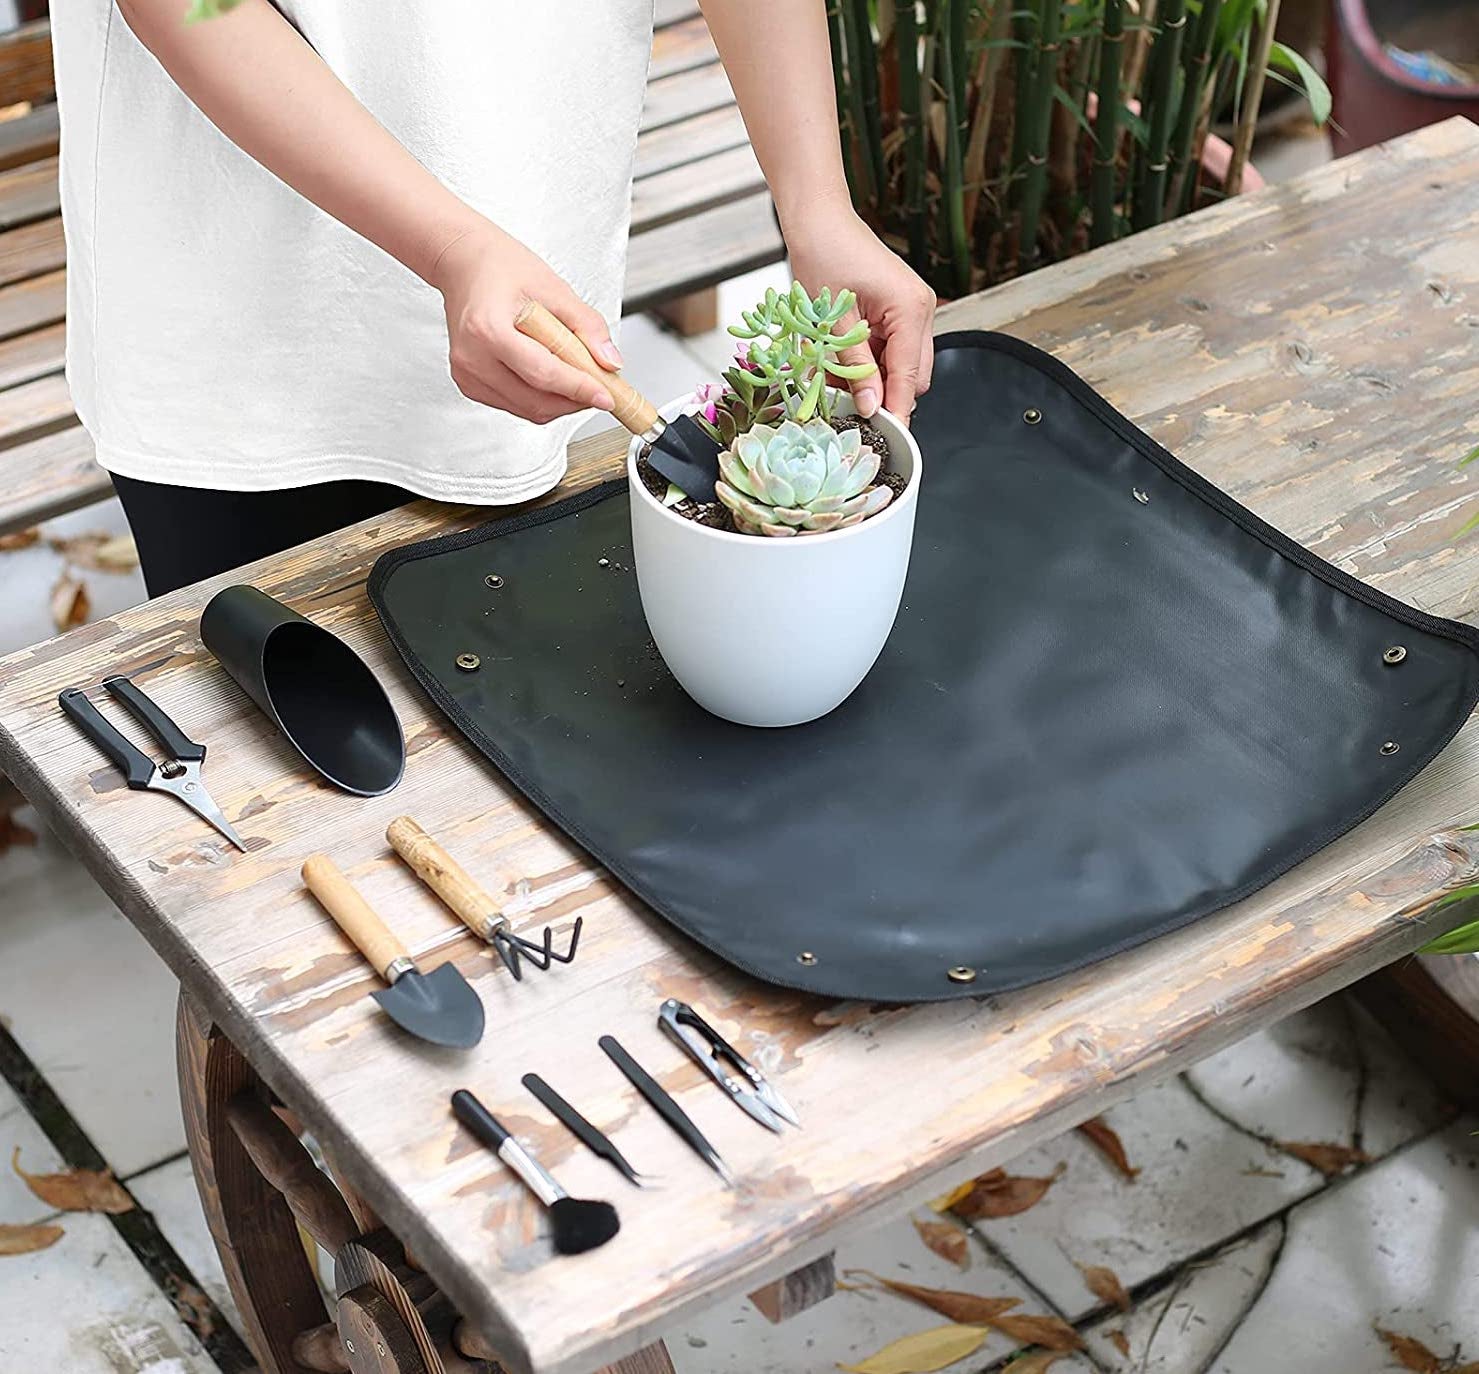 Photo of gardening tools being used to plant succulents